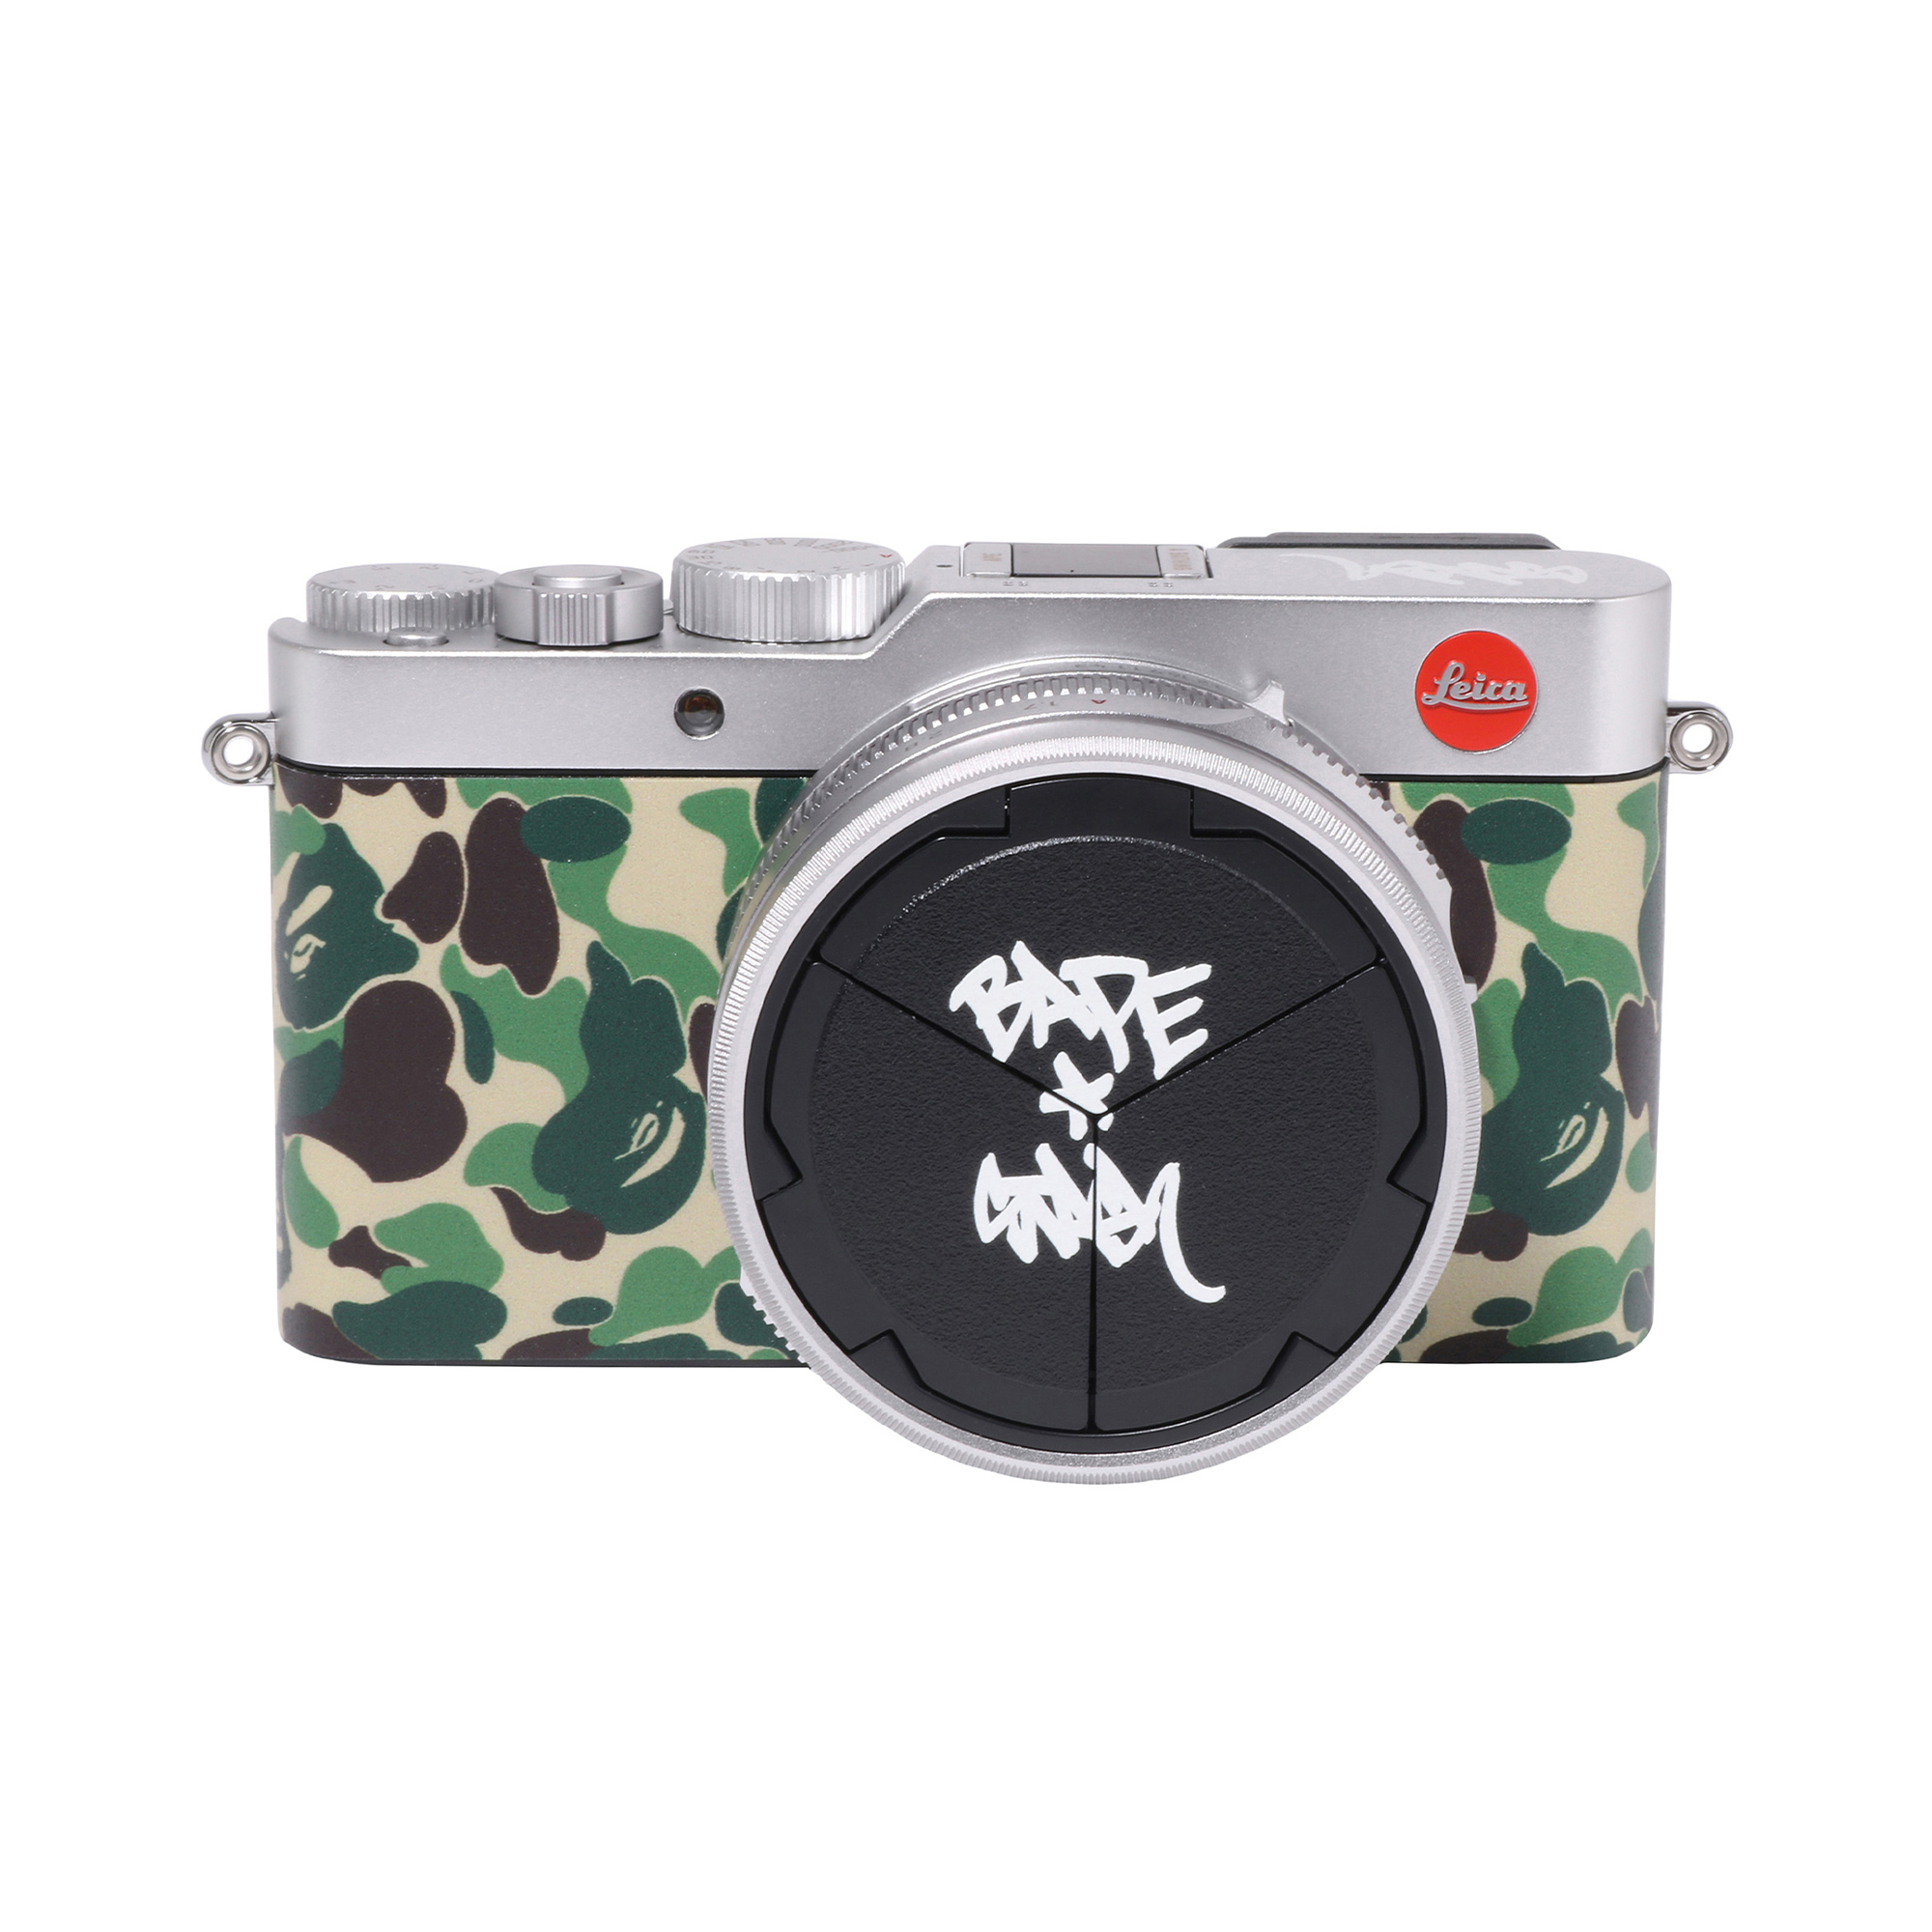 Geschikt Wolk omdraaien BAPE.COM on Twitter: "The Leica D-LUX 7 "A BATHING APE ® x STASH" Silver  will be available at authorized A BATHING APE® stores and  https://t.co/KulC1UiJDI WEBSTORE from August 20th, 2022.  https://t.co/EGYTjOn45m #bape #